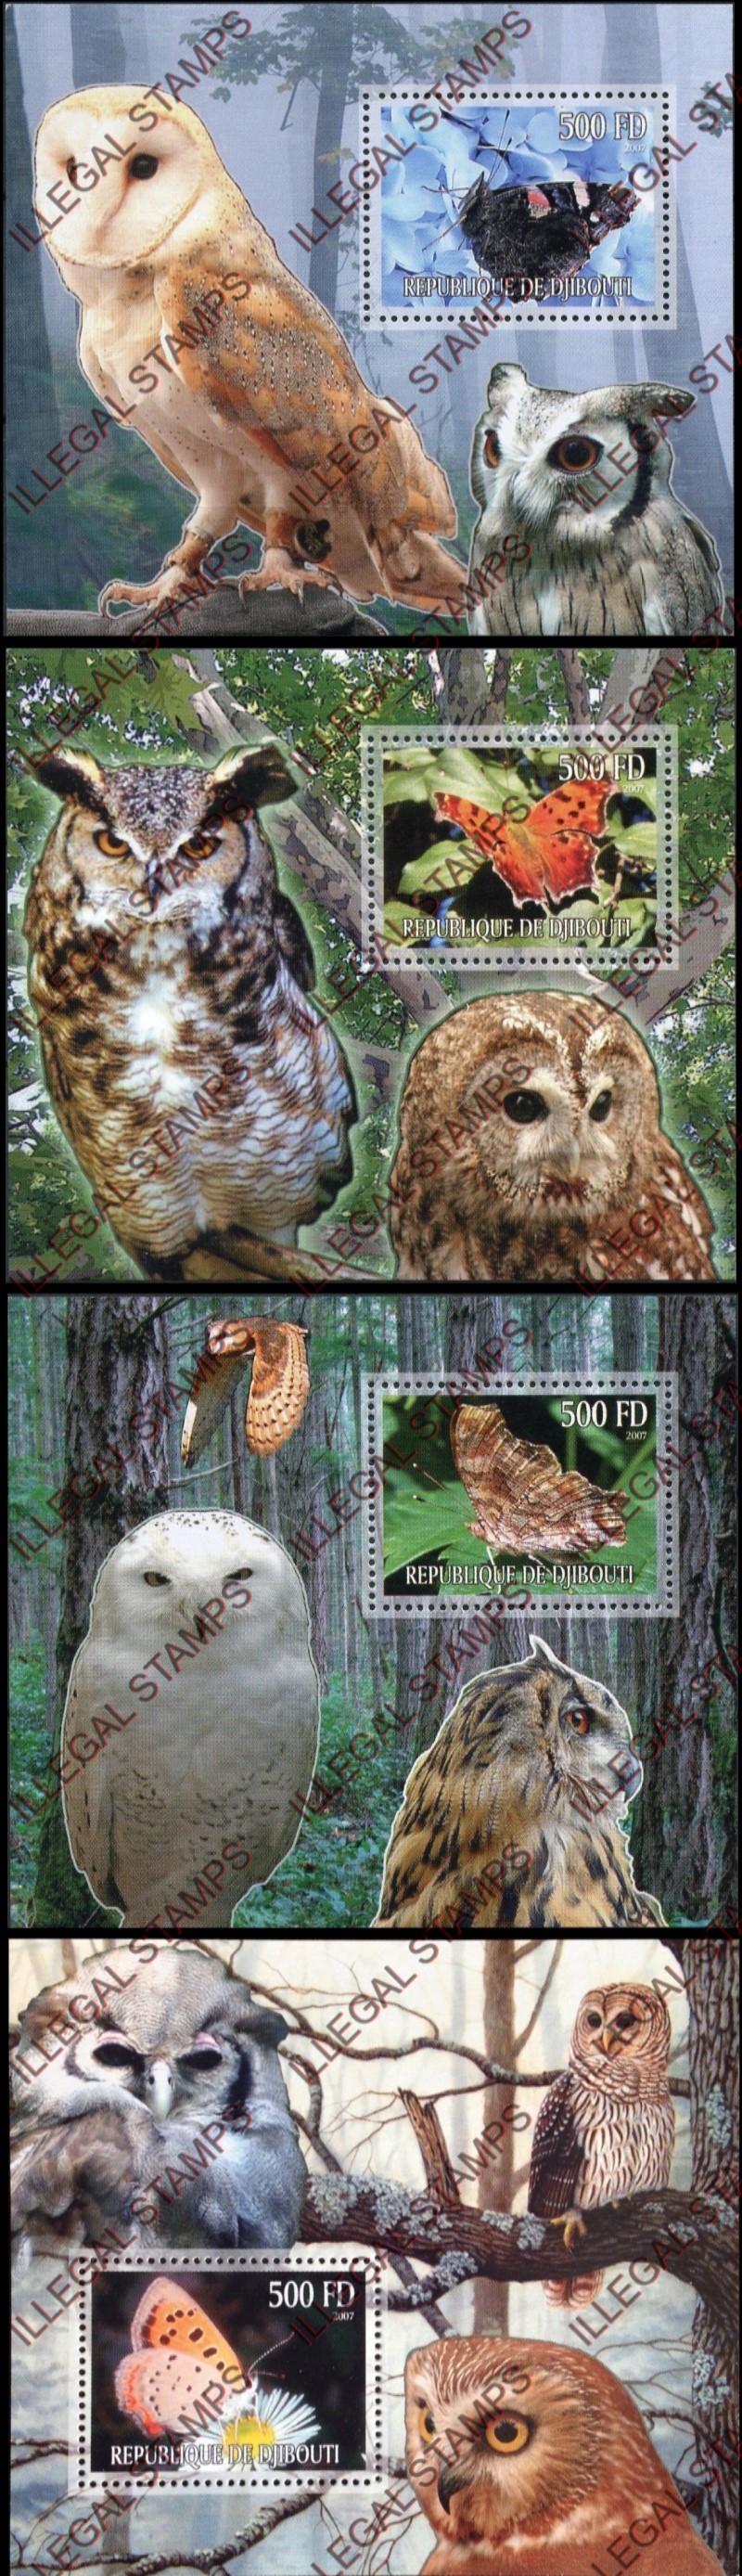 Djibouti 2007 Owls and Butterflies Illegal Stamp Souvenir Sheets of 1